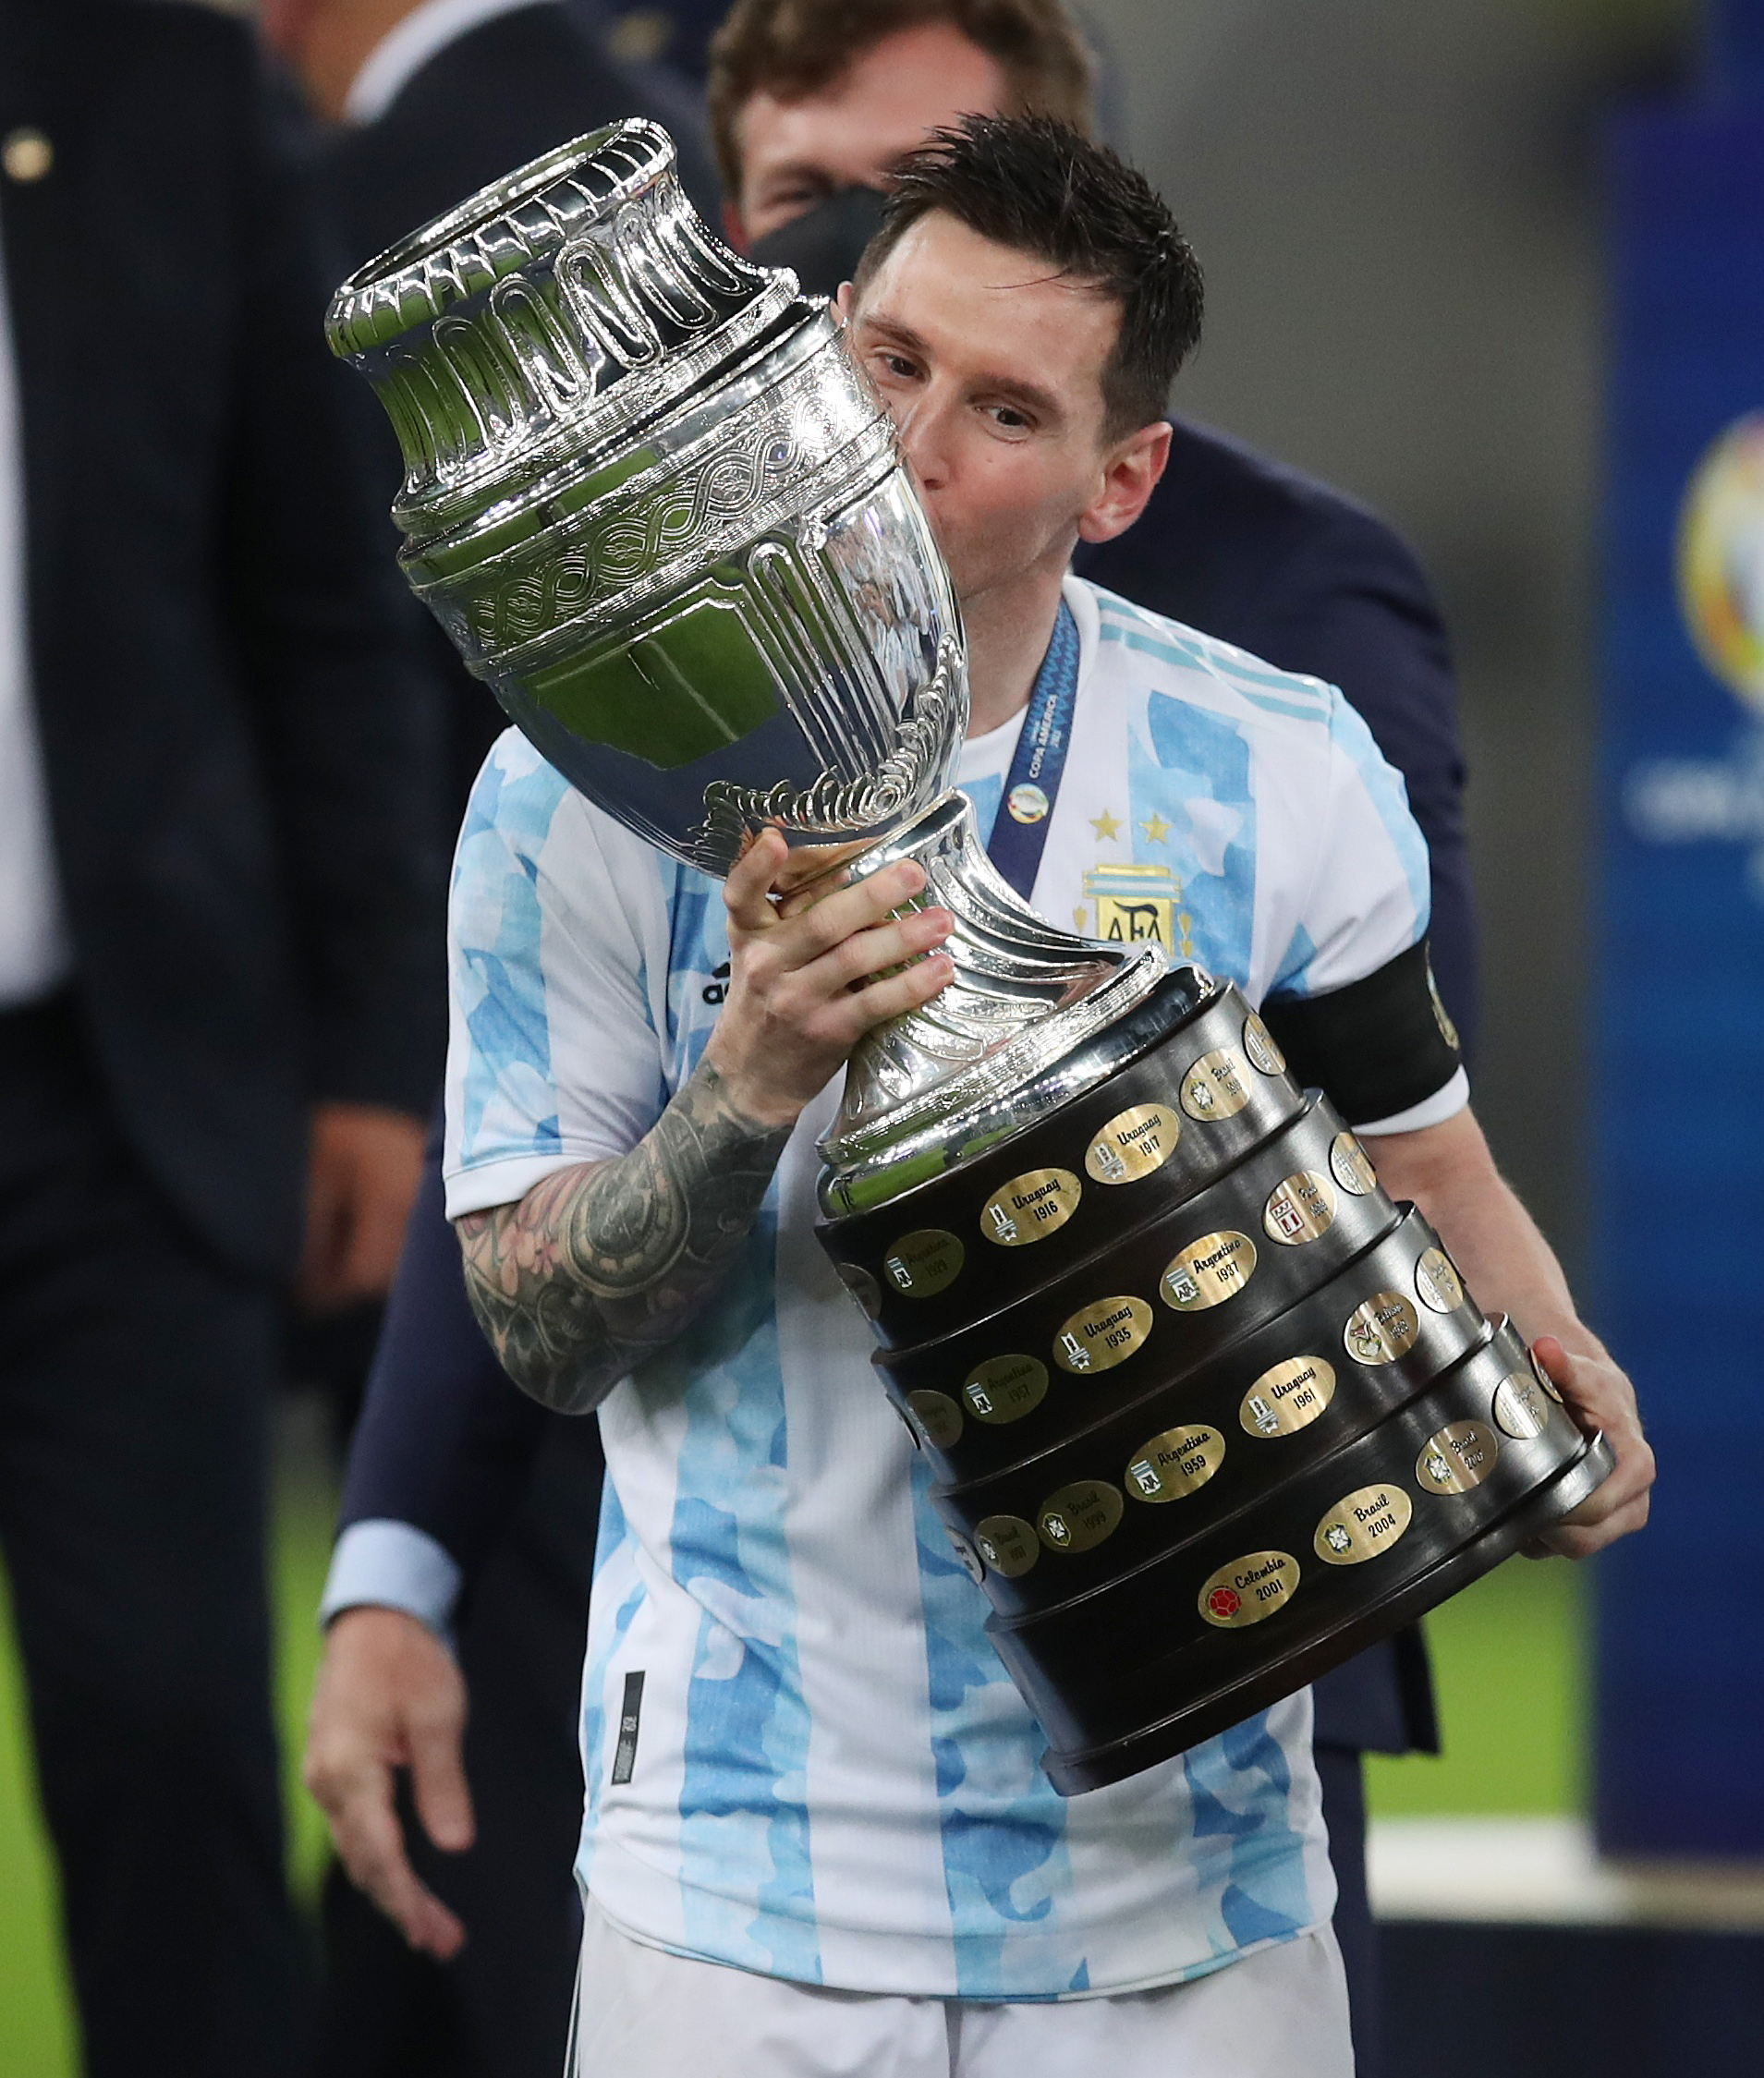 Messi kisses the Cup he longed for so much: now he will go for the World Cup (REUTERS / Ricardo Moraes)